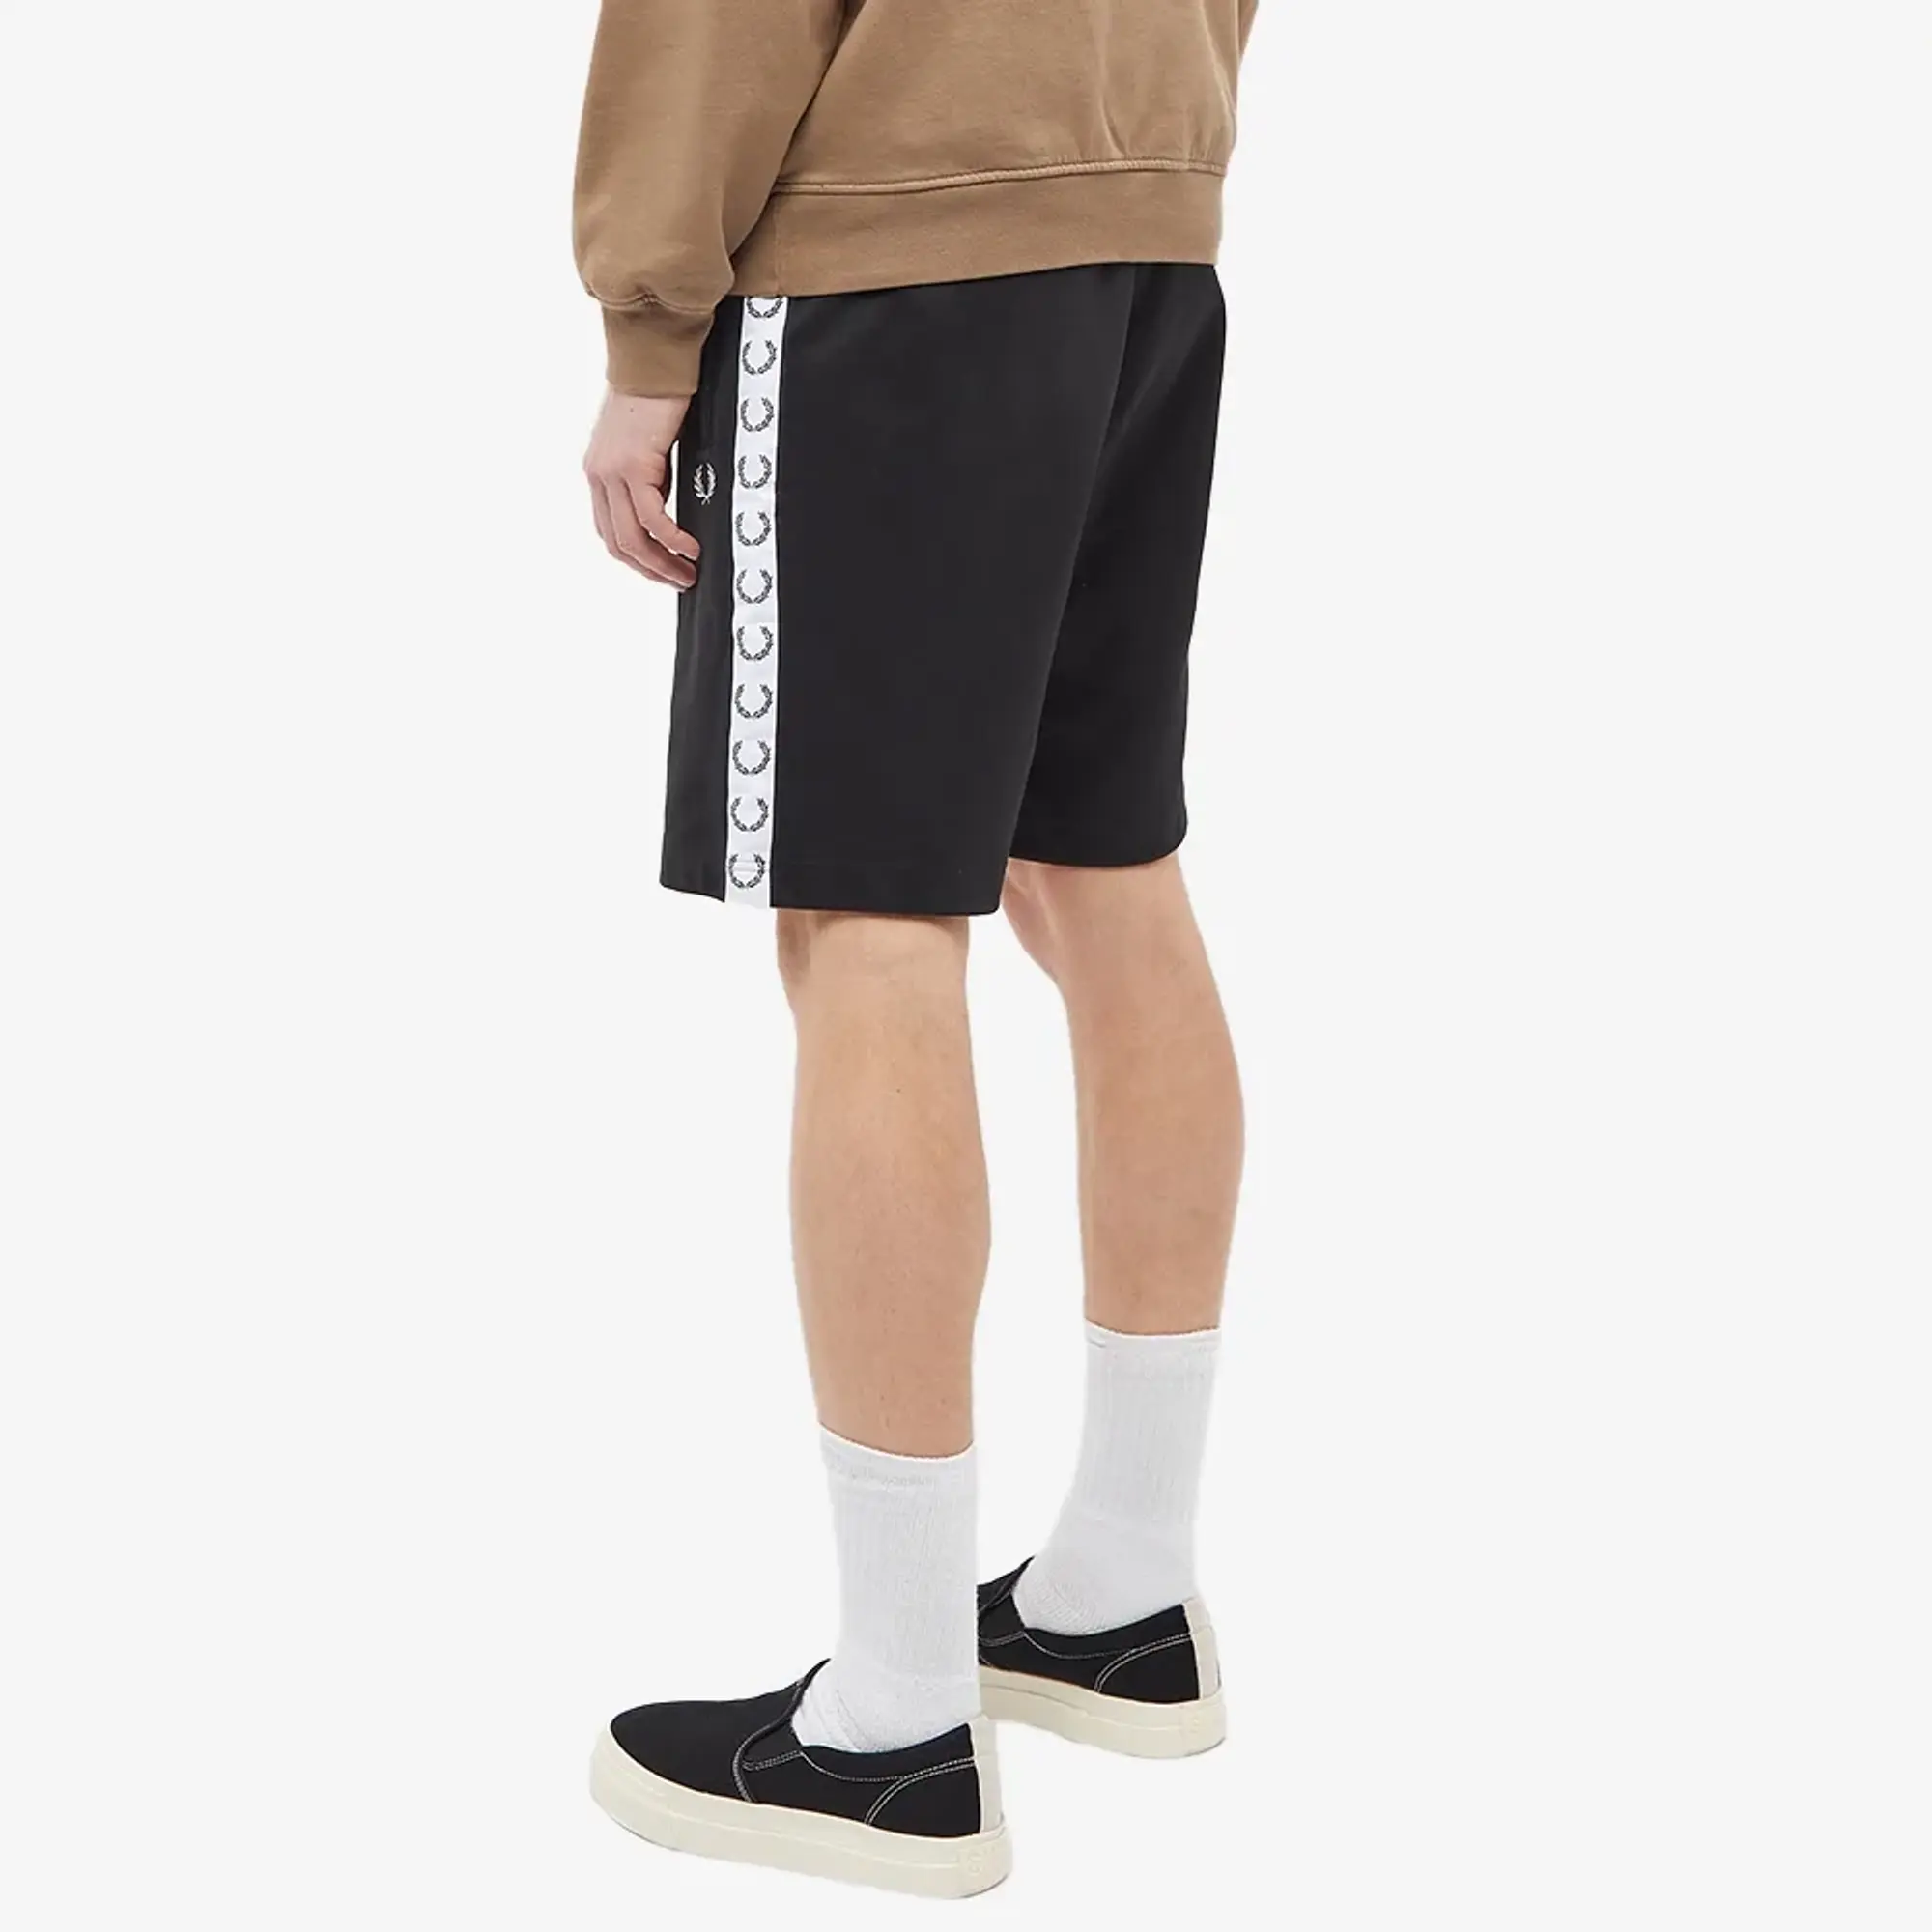 Fred Perry Taped Tricot Short - Black | S5508-102 | FOOTY.COM